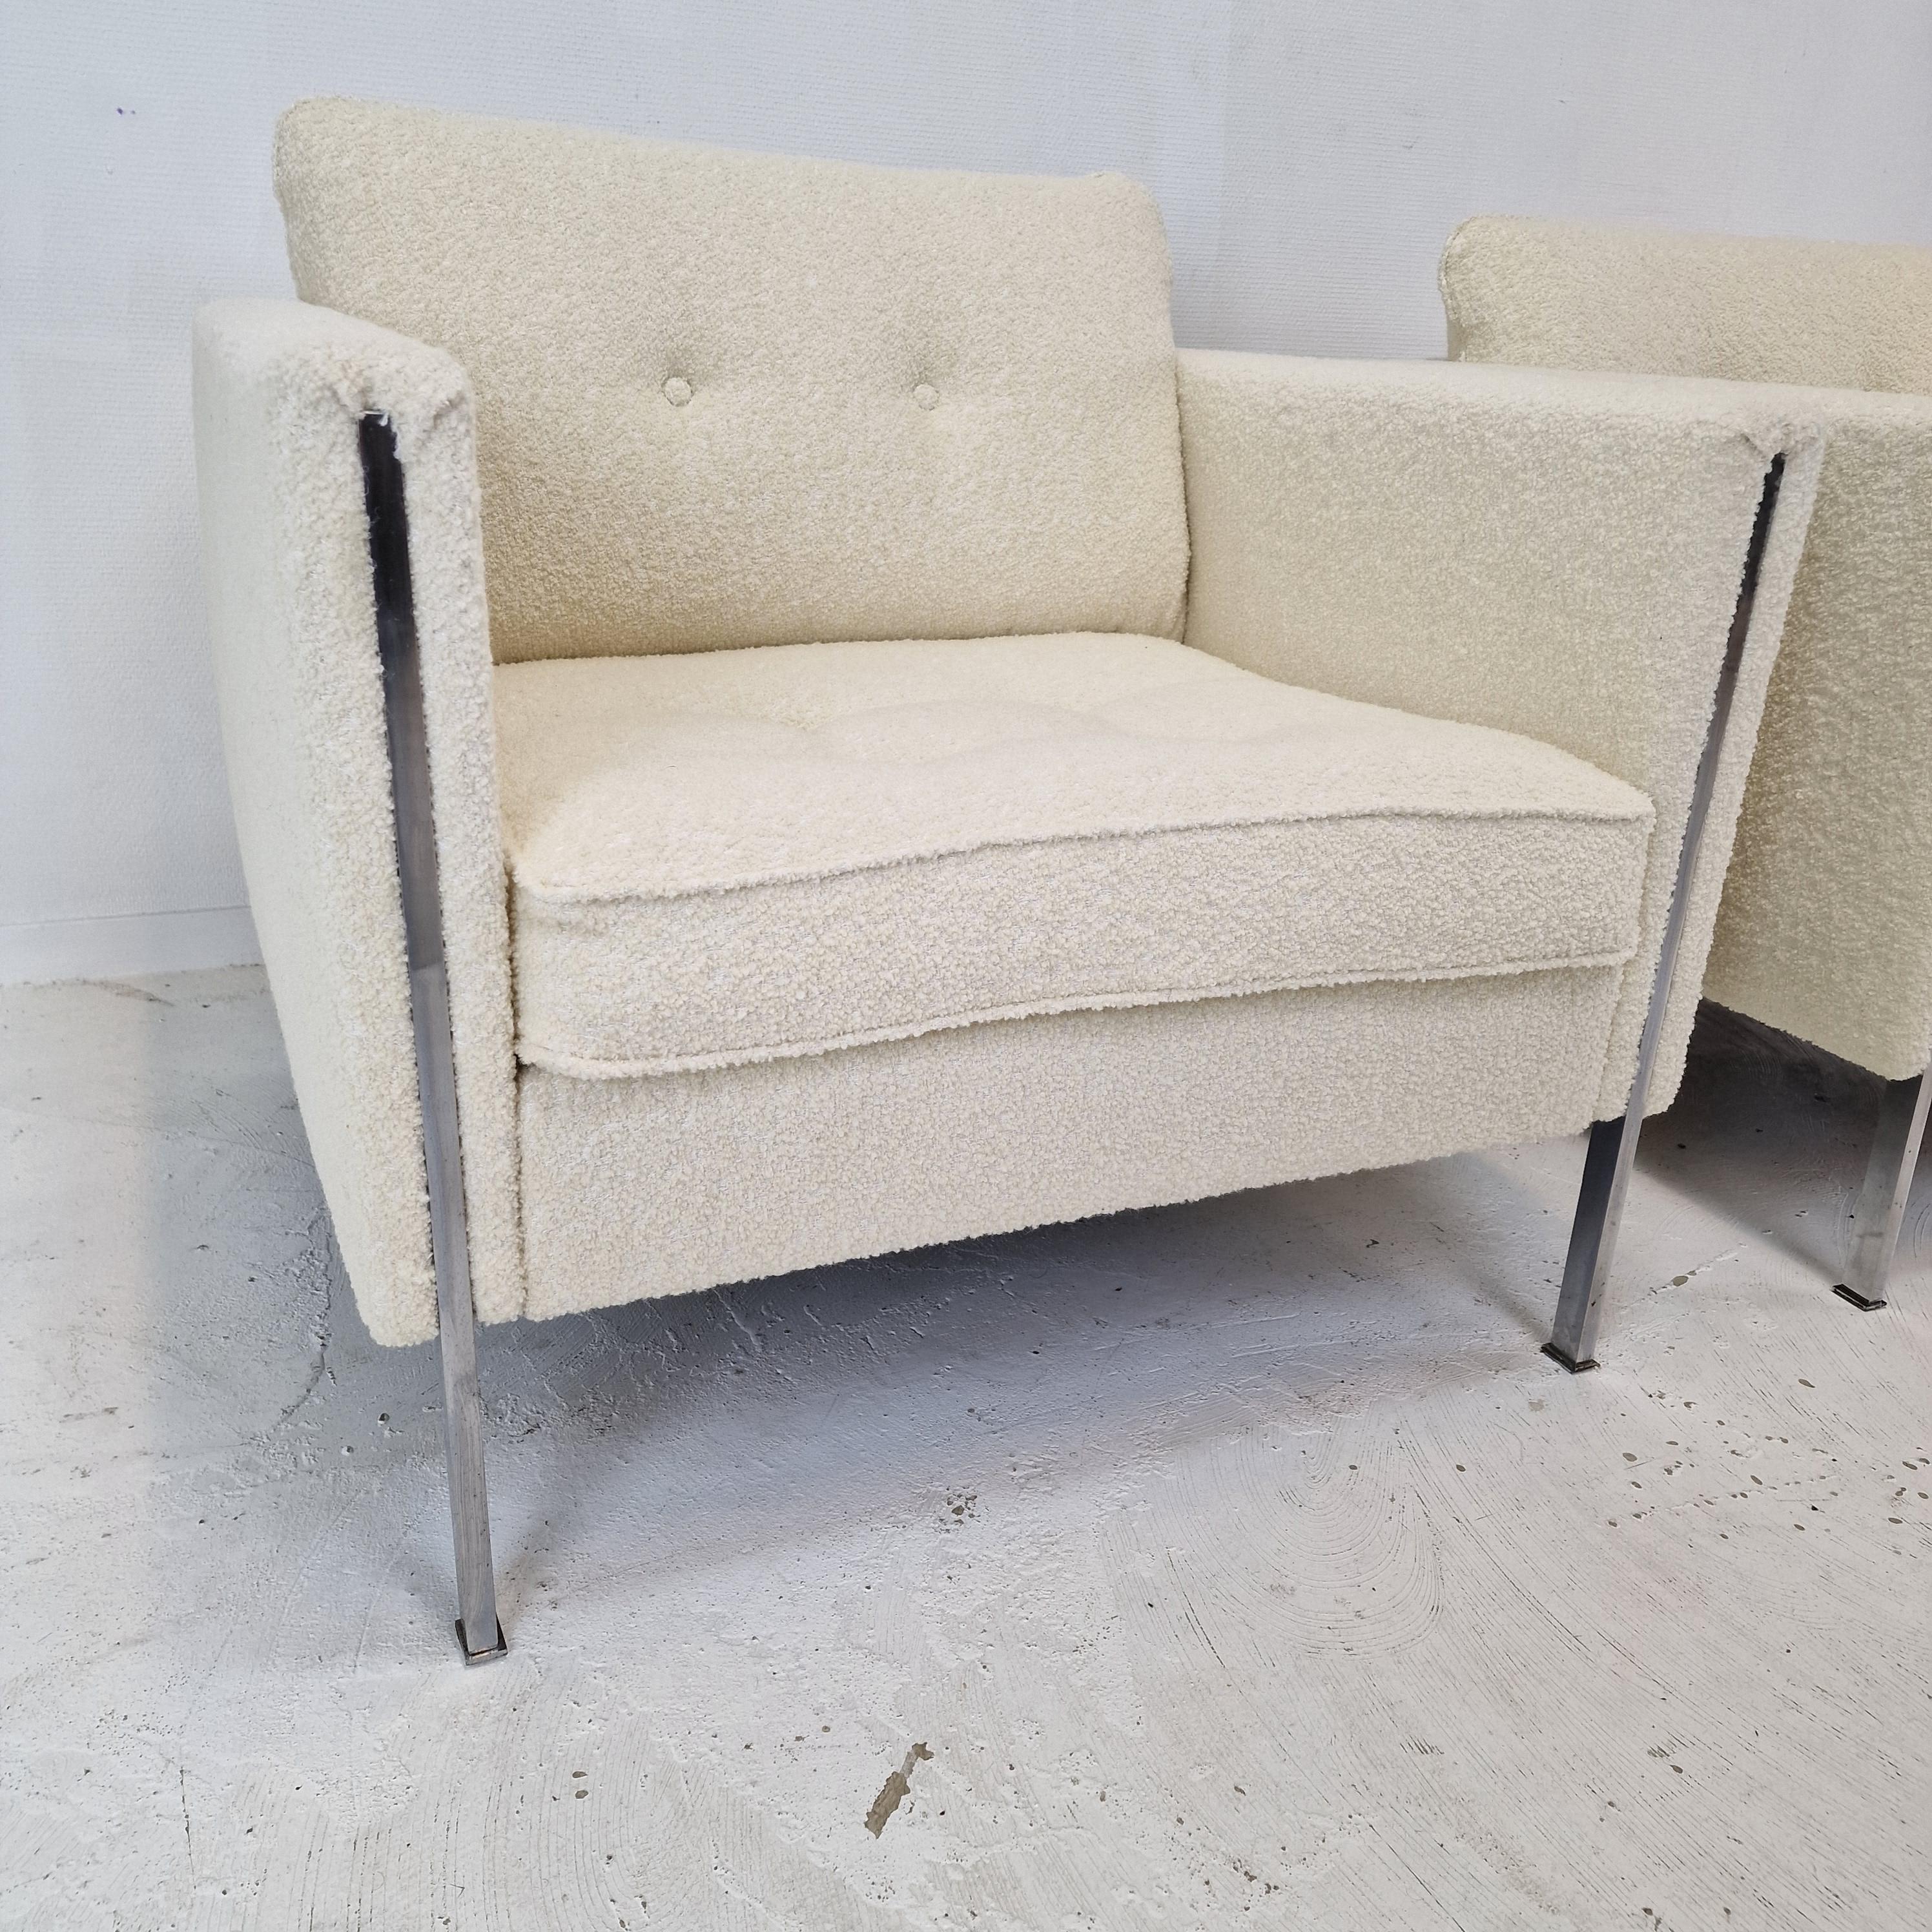 Midcentury Set of 2 Model 442 Chairs by Pierre Paulin for Artifort, 1960s For Sale 5